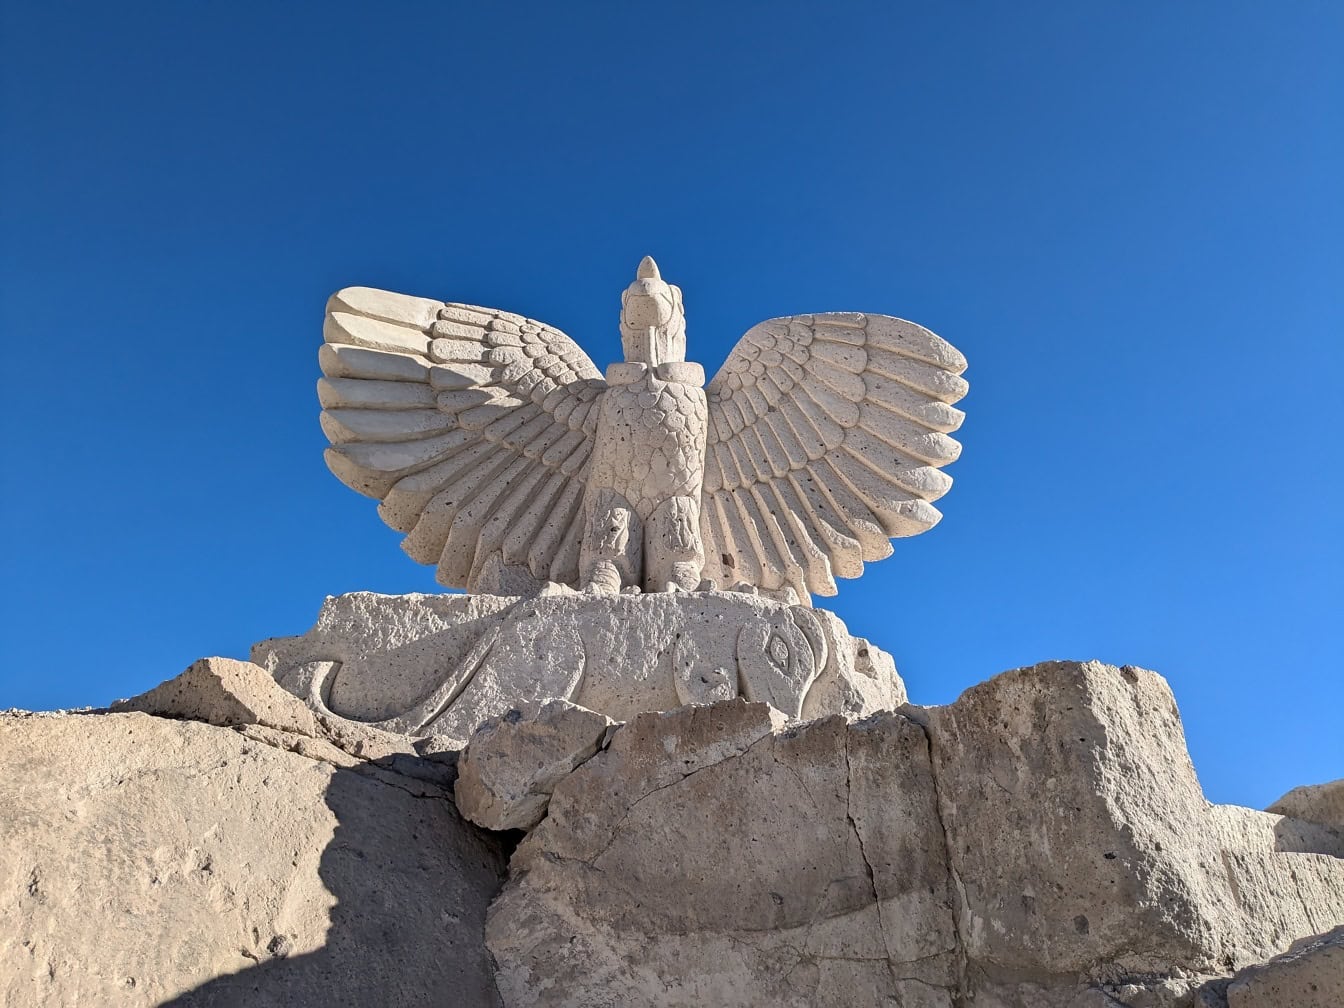 A beautiful statue of a bird with wide open wings at the Sillar route near Culebrillas canyon in Arequipa in Peru